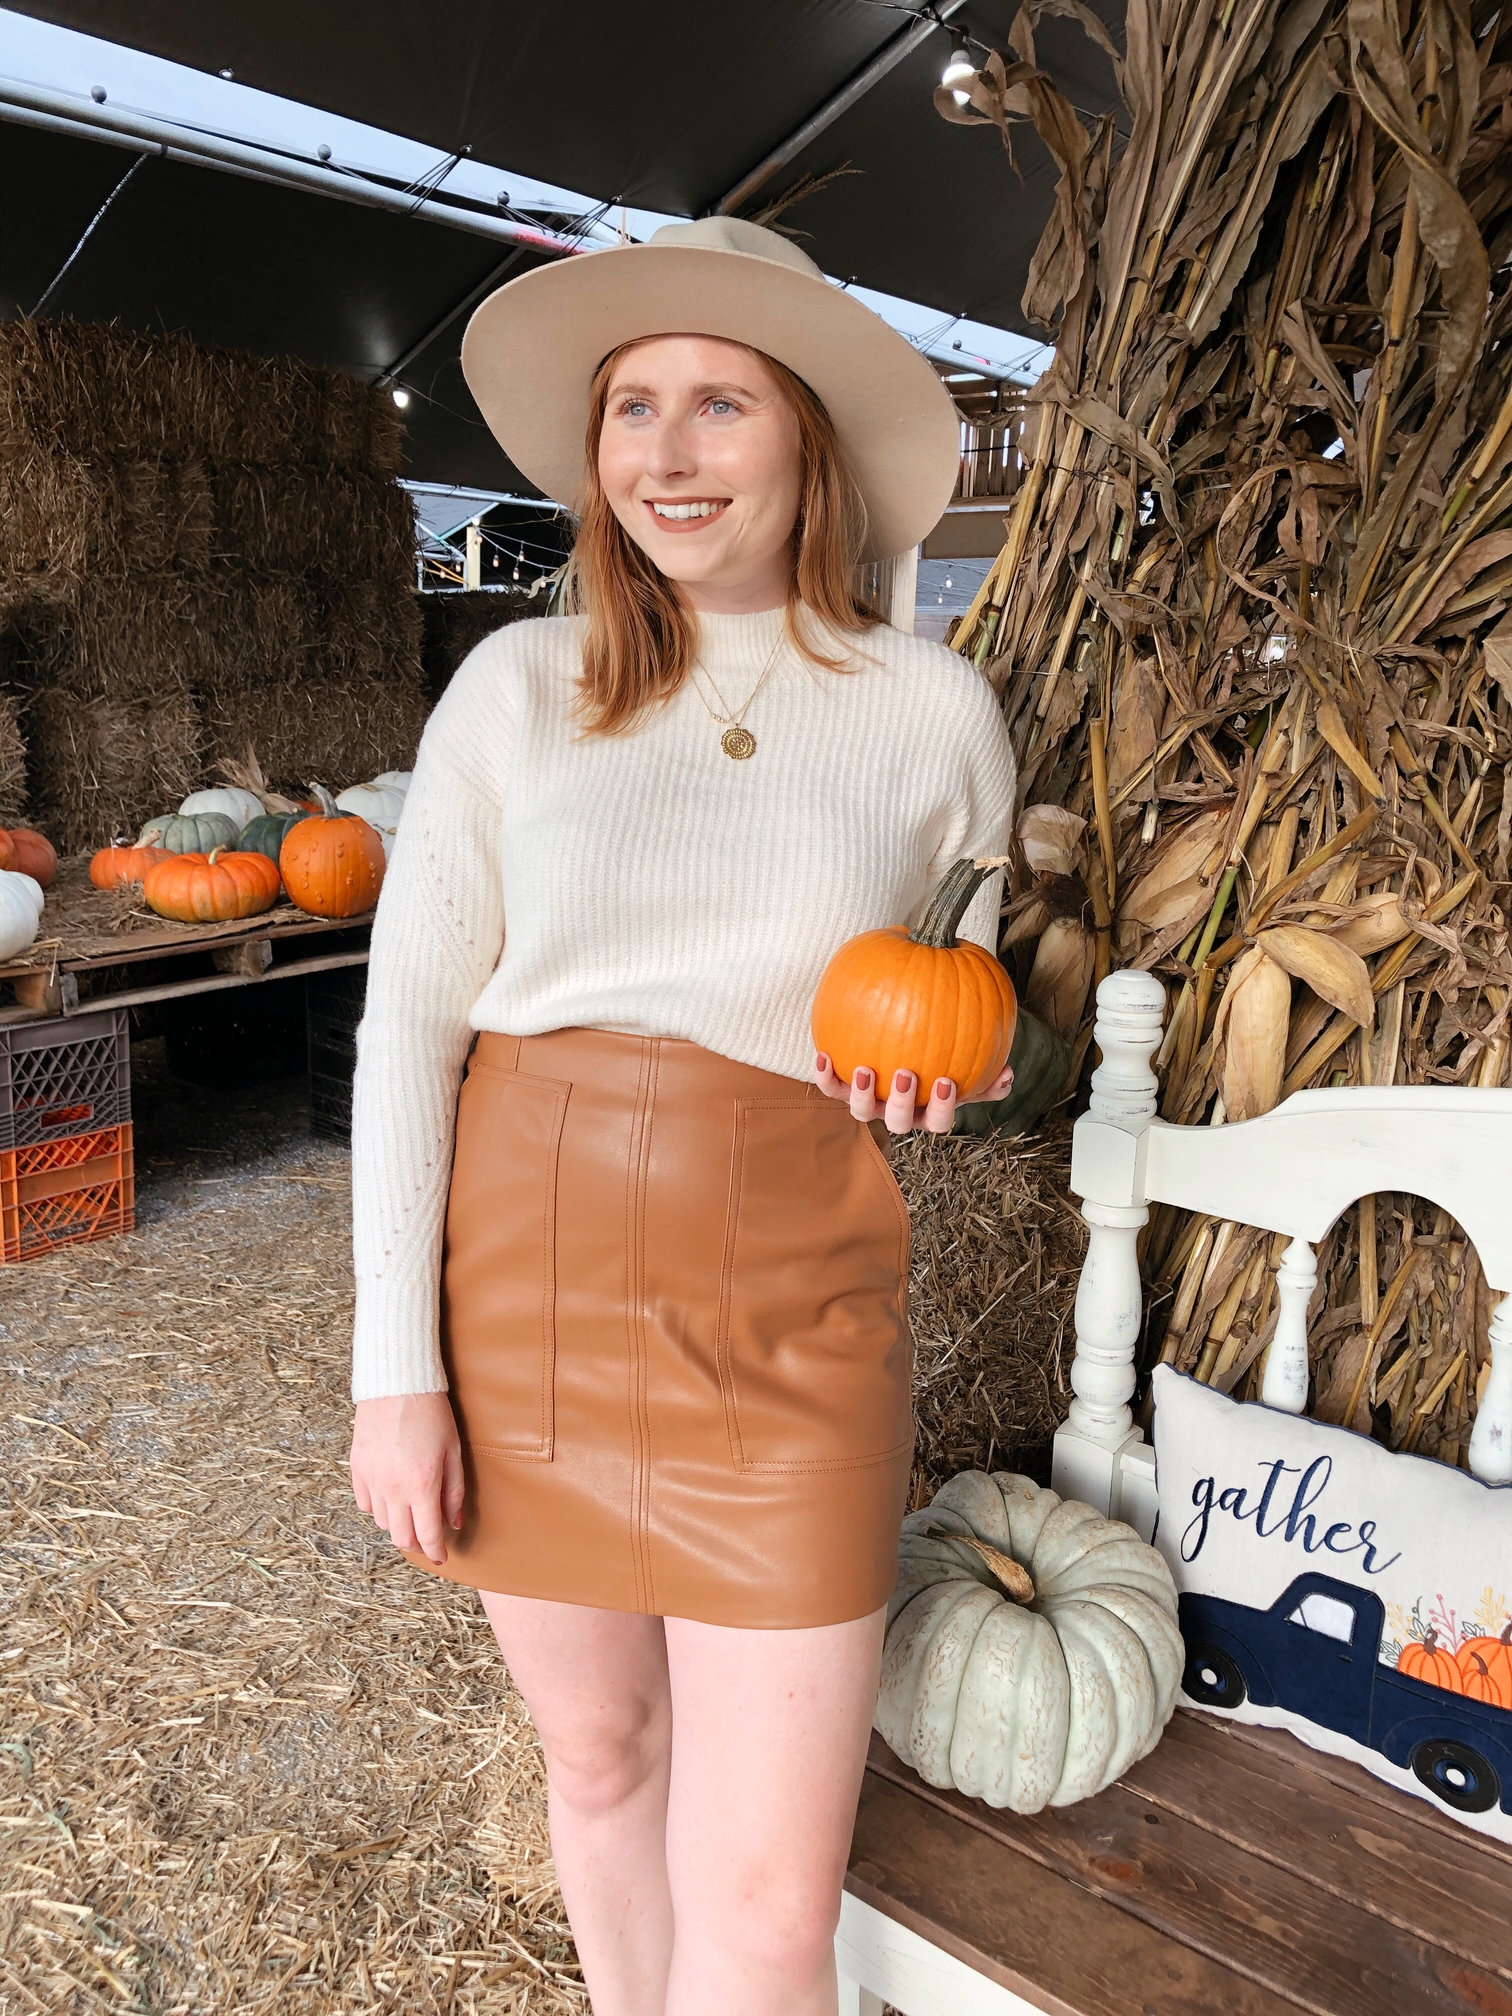 What To Wear to a Pumpkin Patch. Pumpkin Patch Outfit Ideas. Red haired woman wears a white knit long sleeve sweater tucked into a brown faux leather mini skirt. She is wearing brown suede lace-up ankle booties. She has on a wide-brim hat and is holding a pumpkin in her hand. 